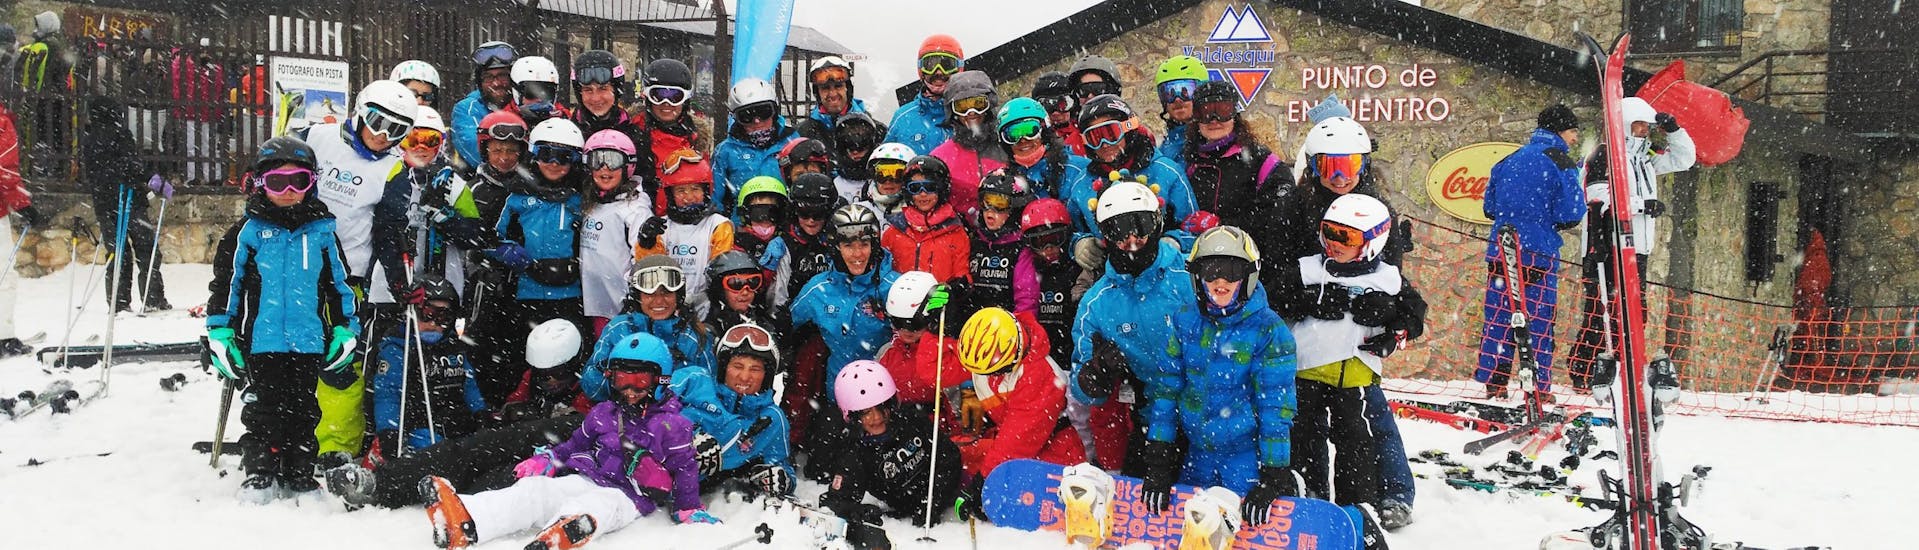 Teen Ski Lessons (15-17 y.) for Beginners.